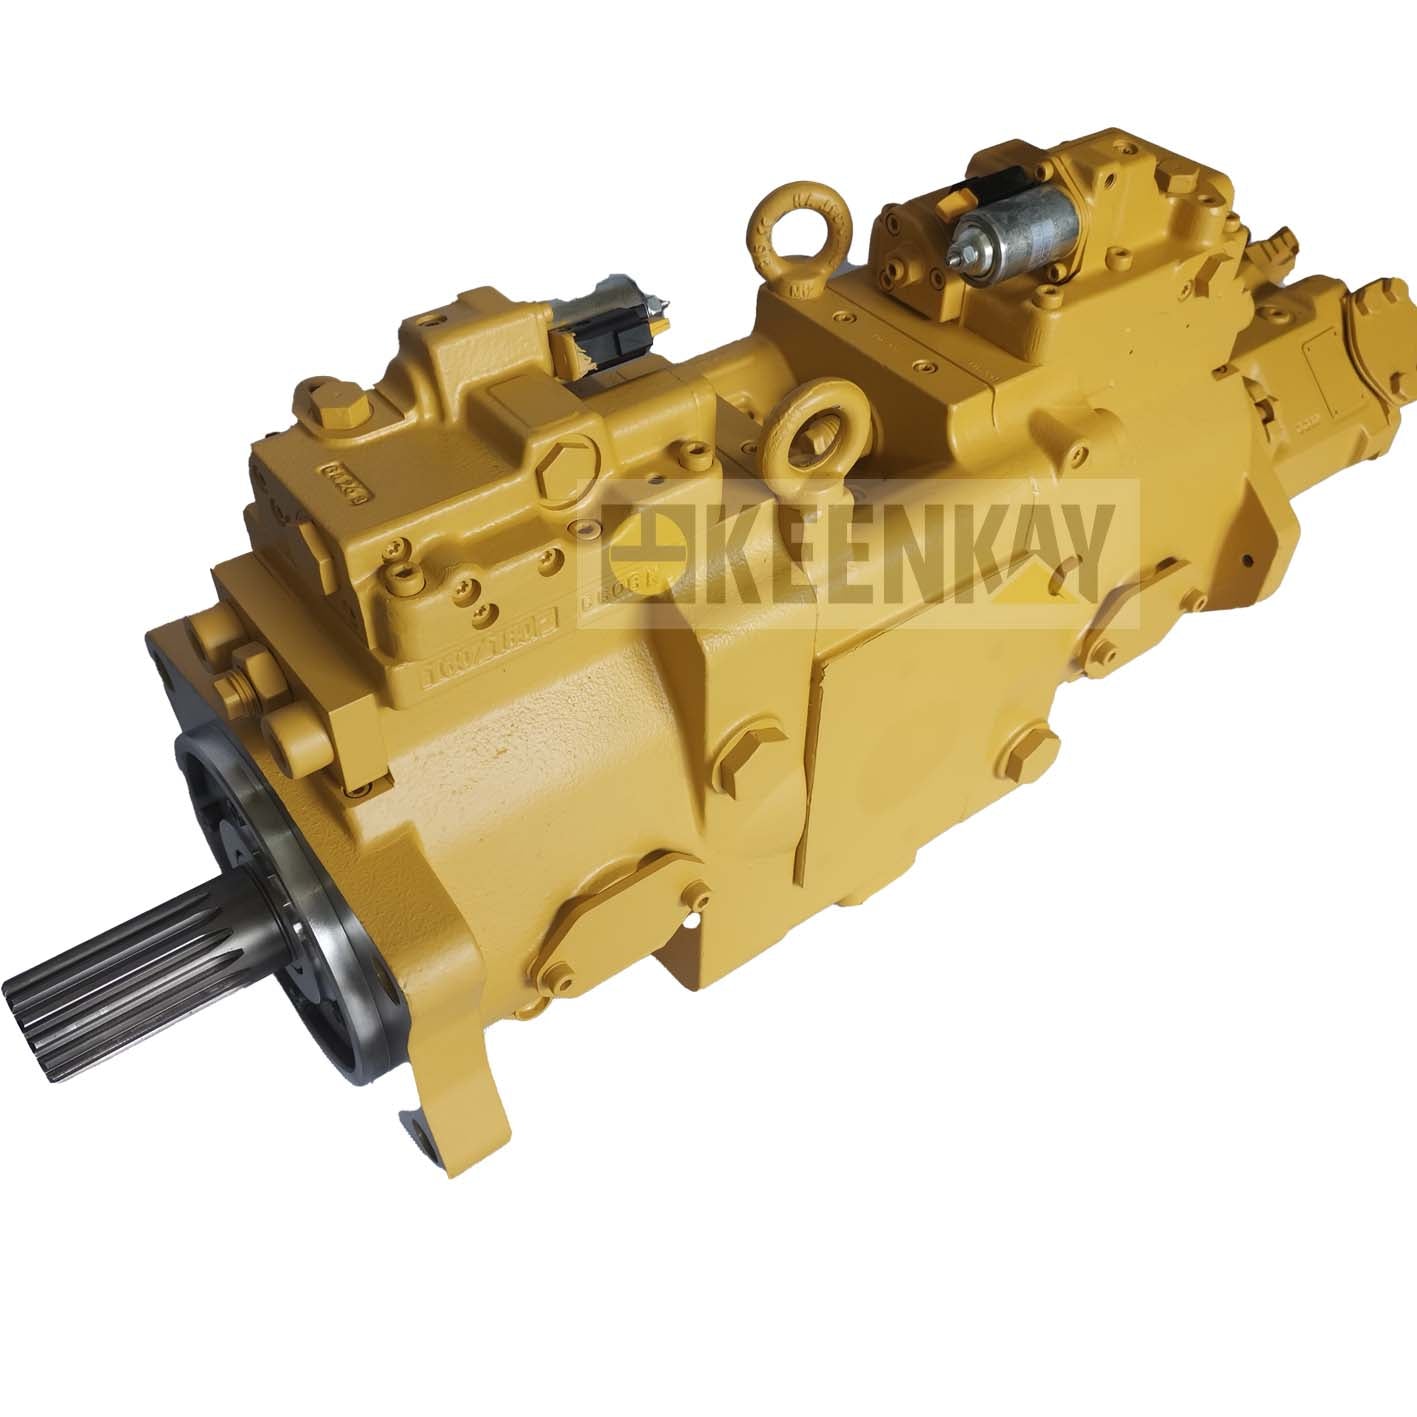 keenkay 550-4341 505-0529 524-0924 Genuine and Untapped Hydraulic Pump for CAT336GC CAT345GC Excavator